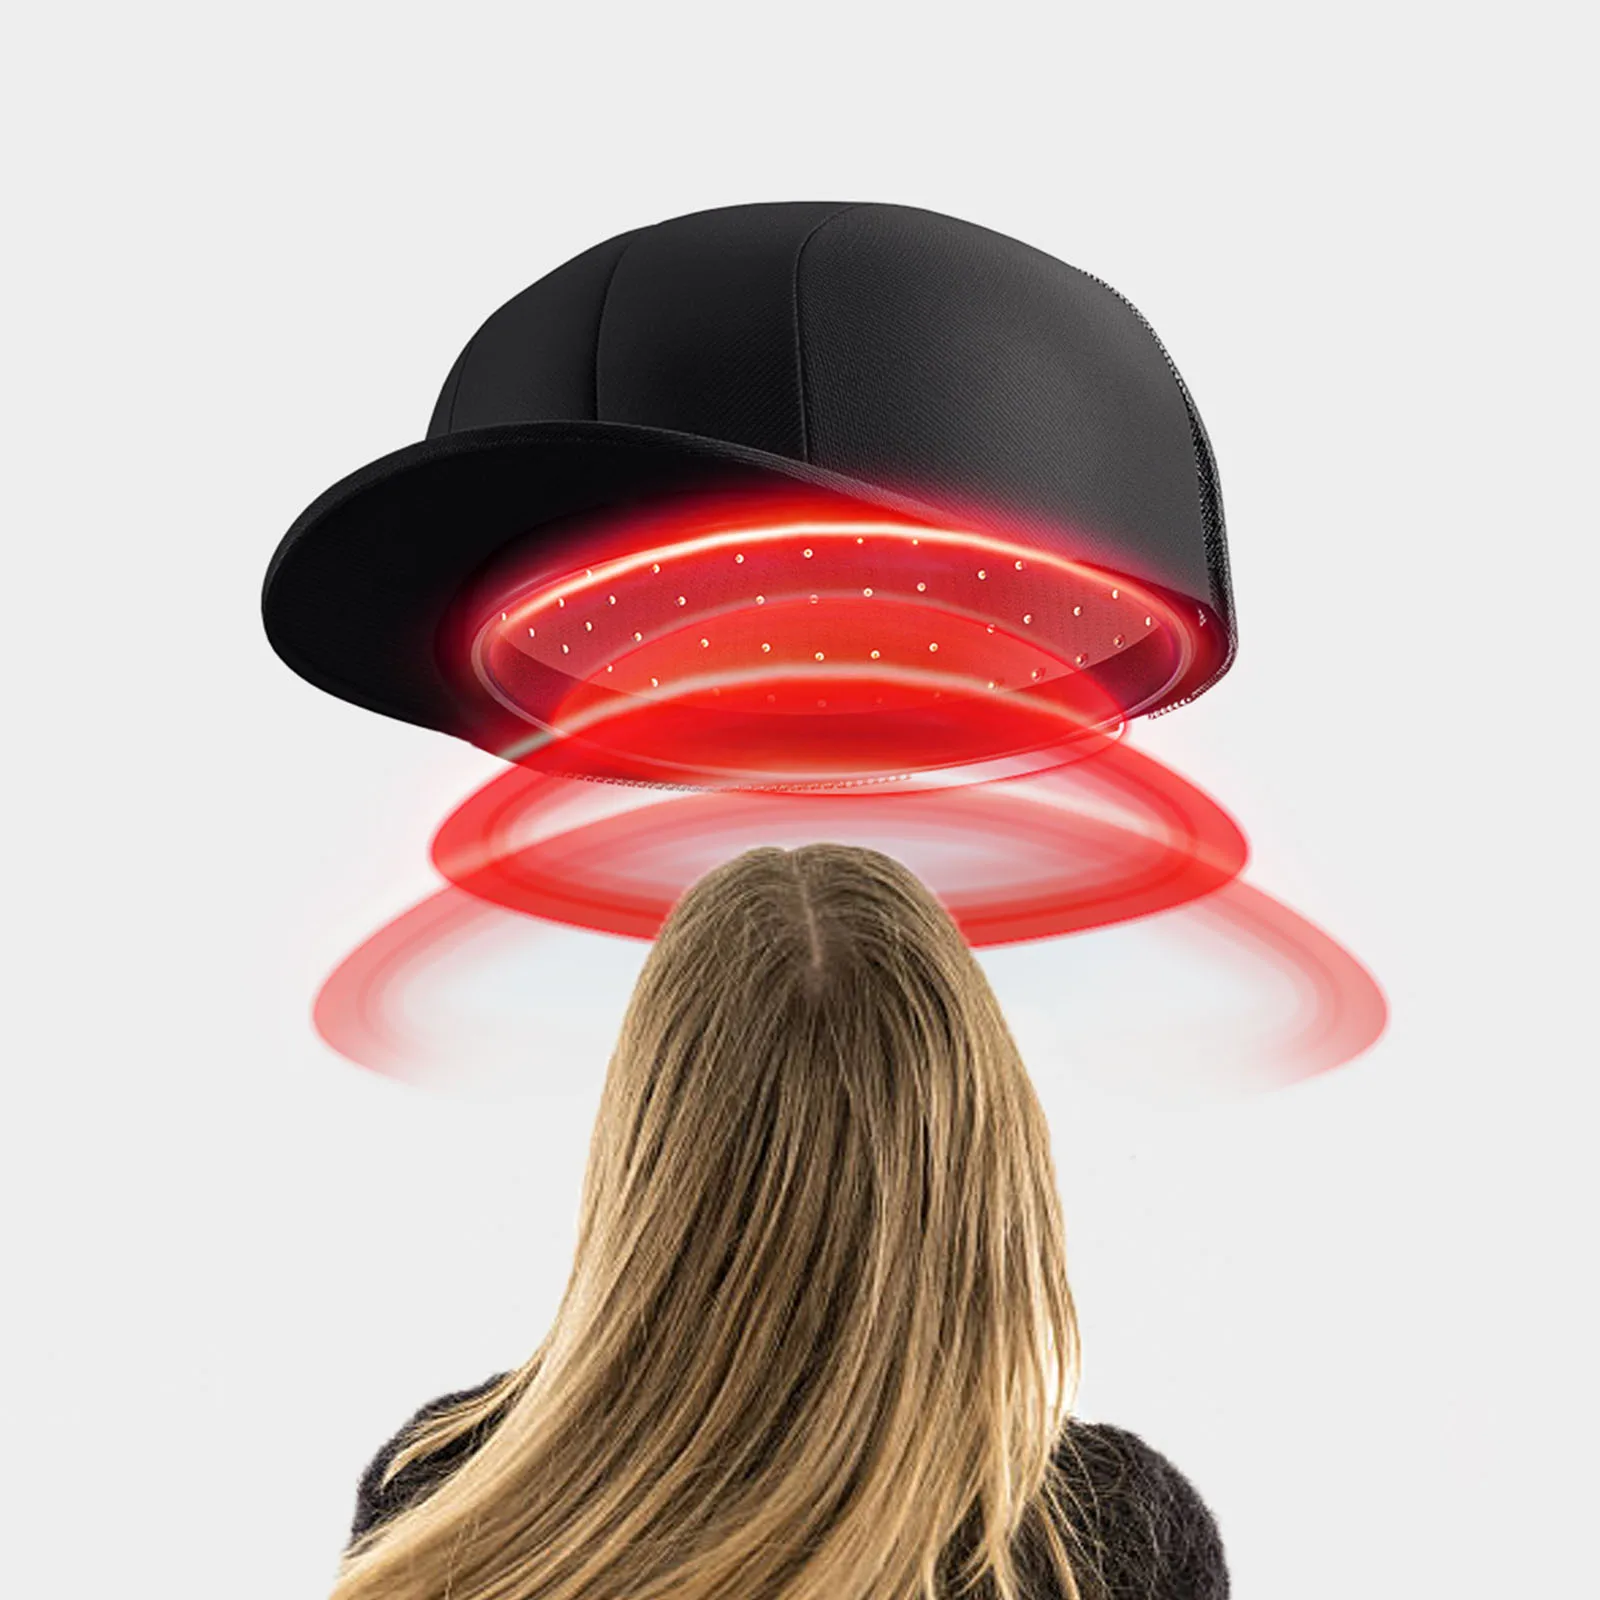 

hair loss led red light cap 312 diode cap medical cap therapy device for thinning hair